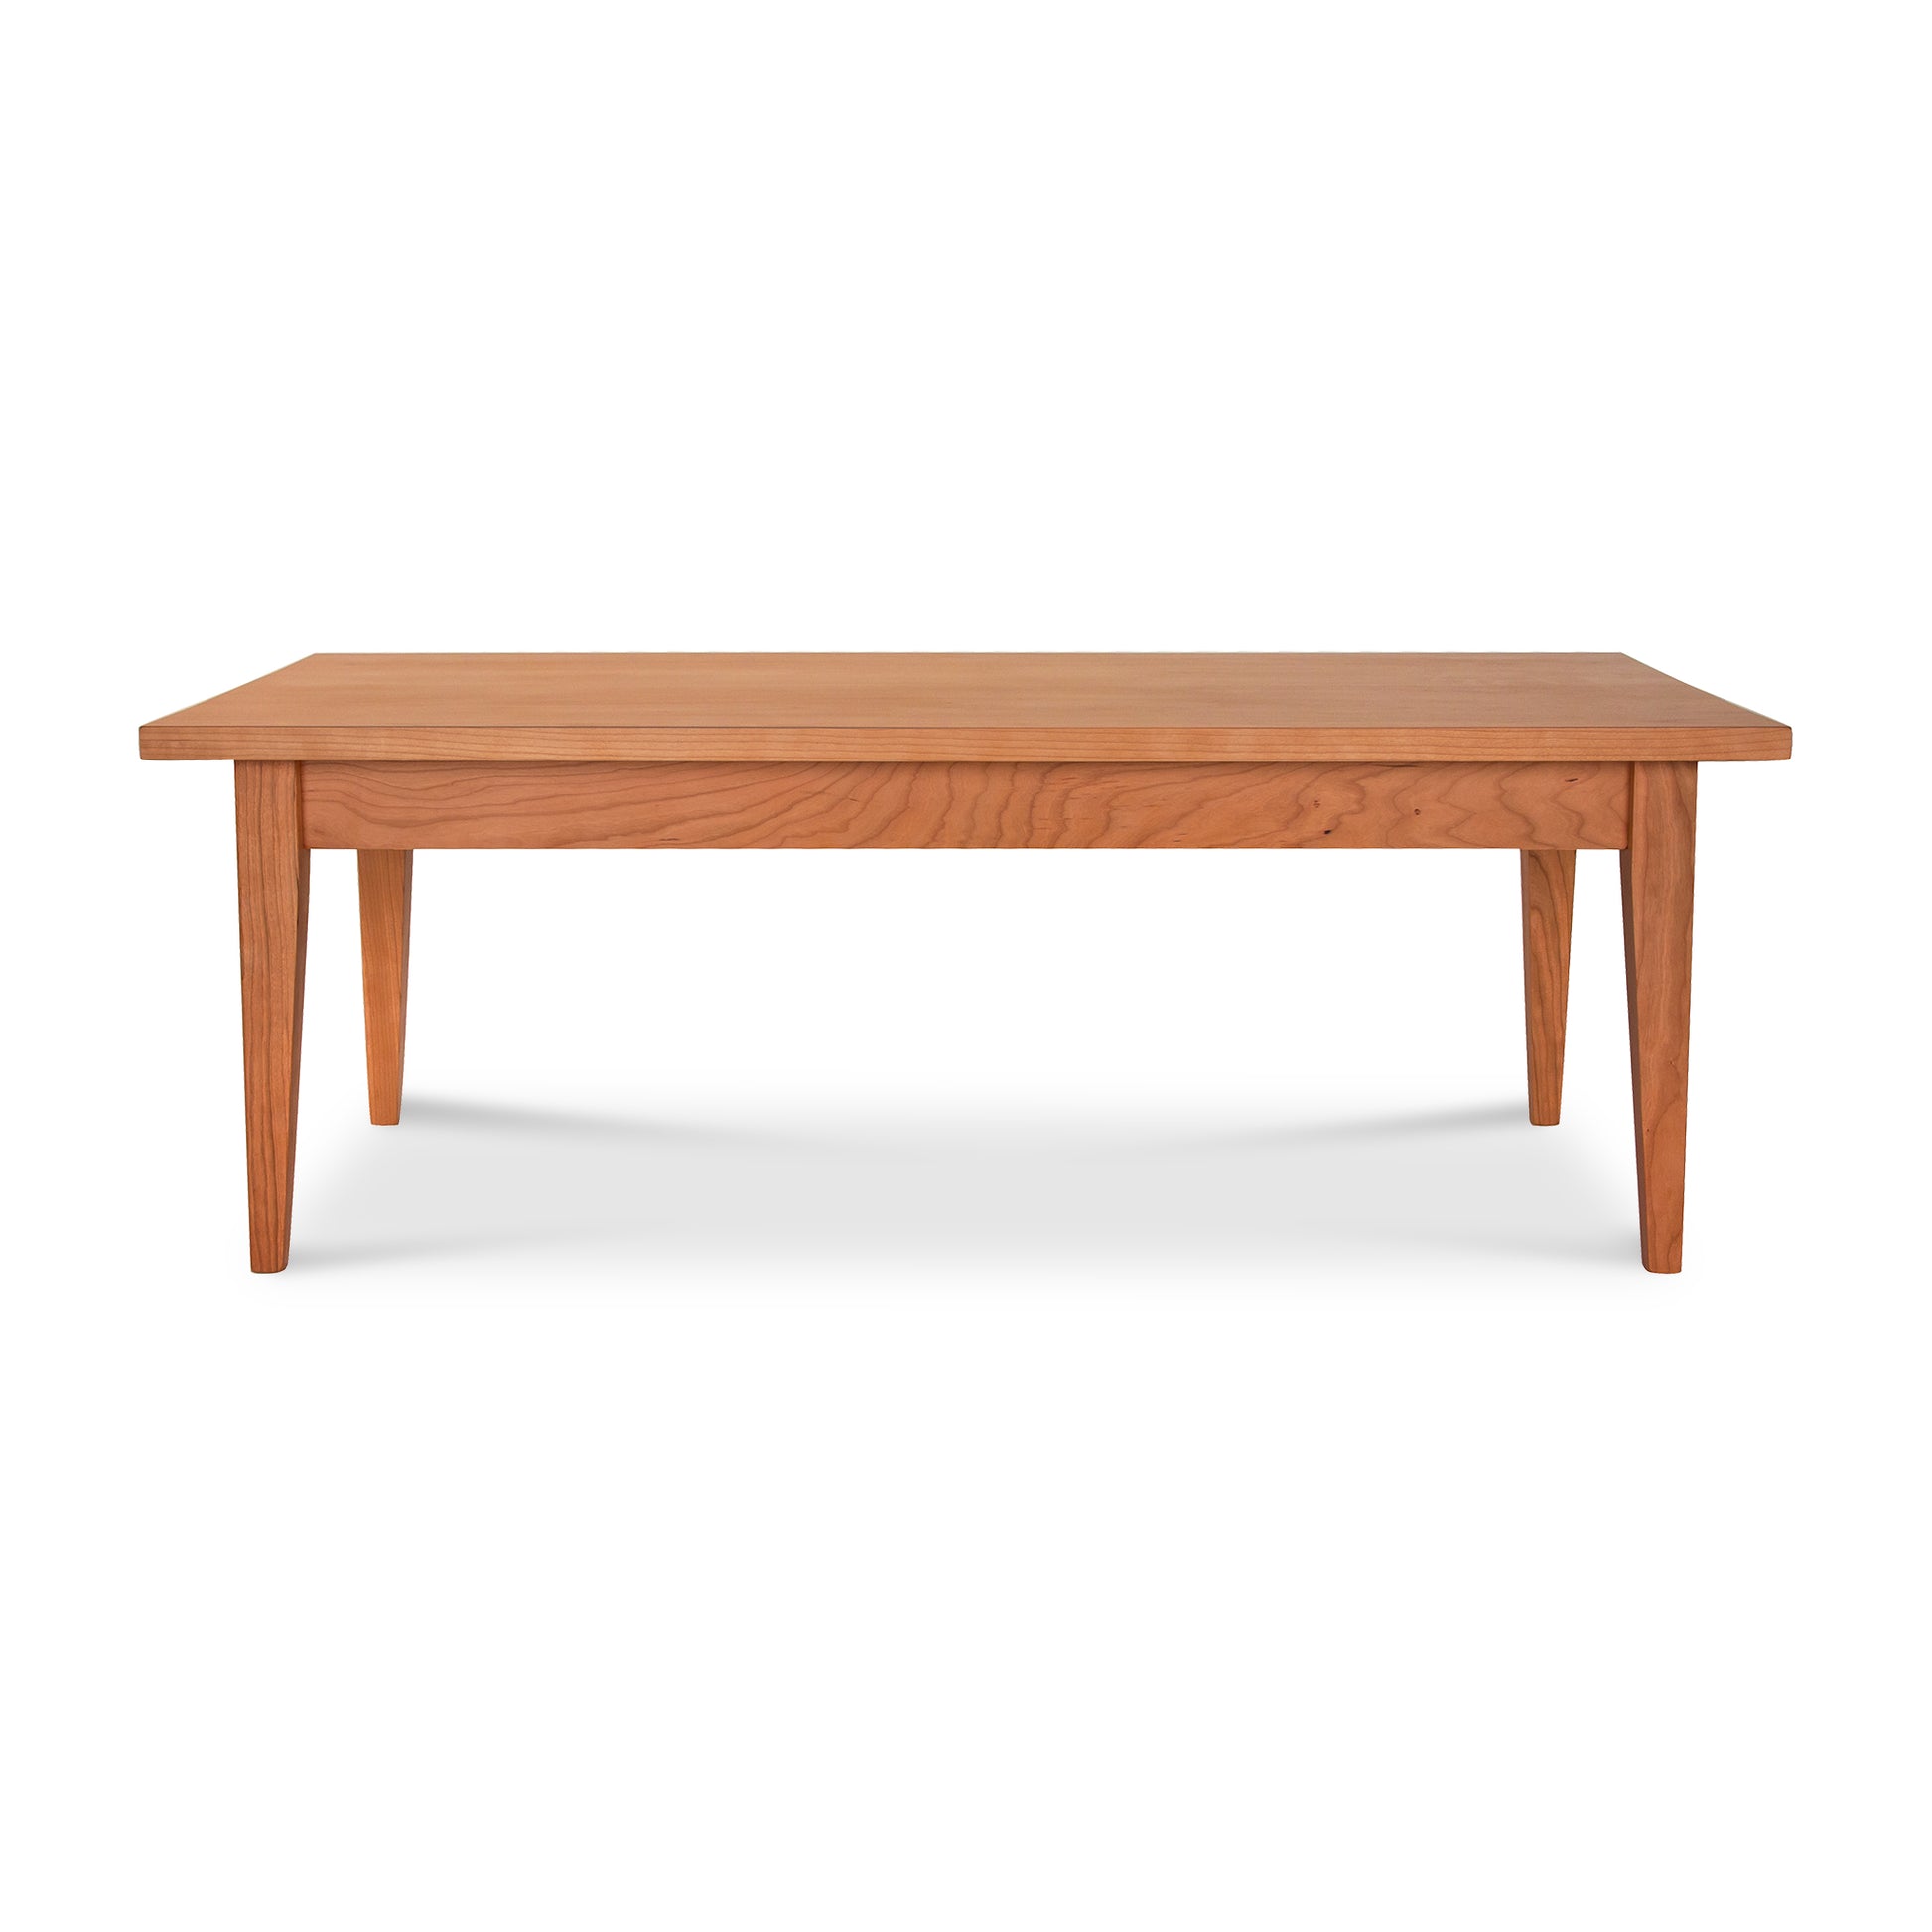 A Classic Shaker coffee table by Lyndon Furniture, combining style and functionality, placed on a white background.